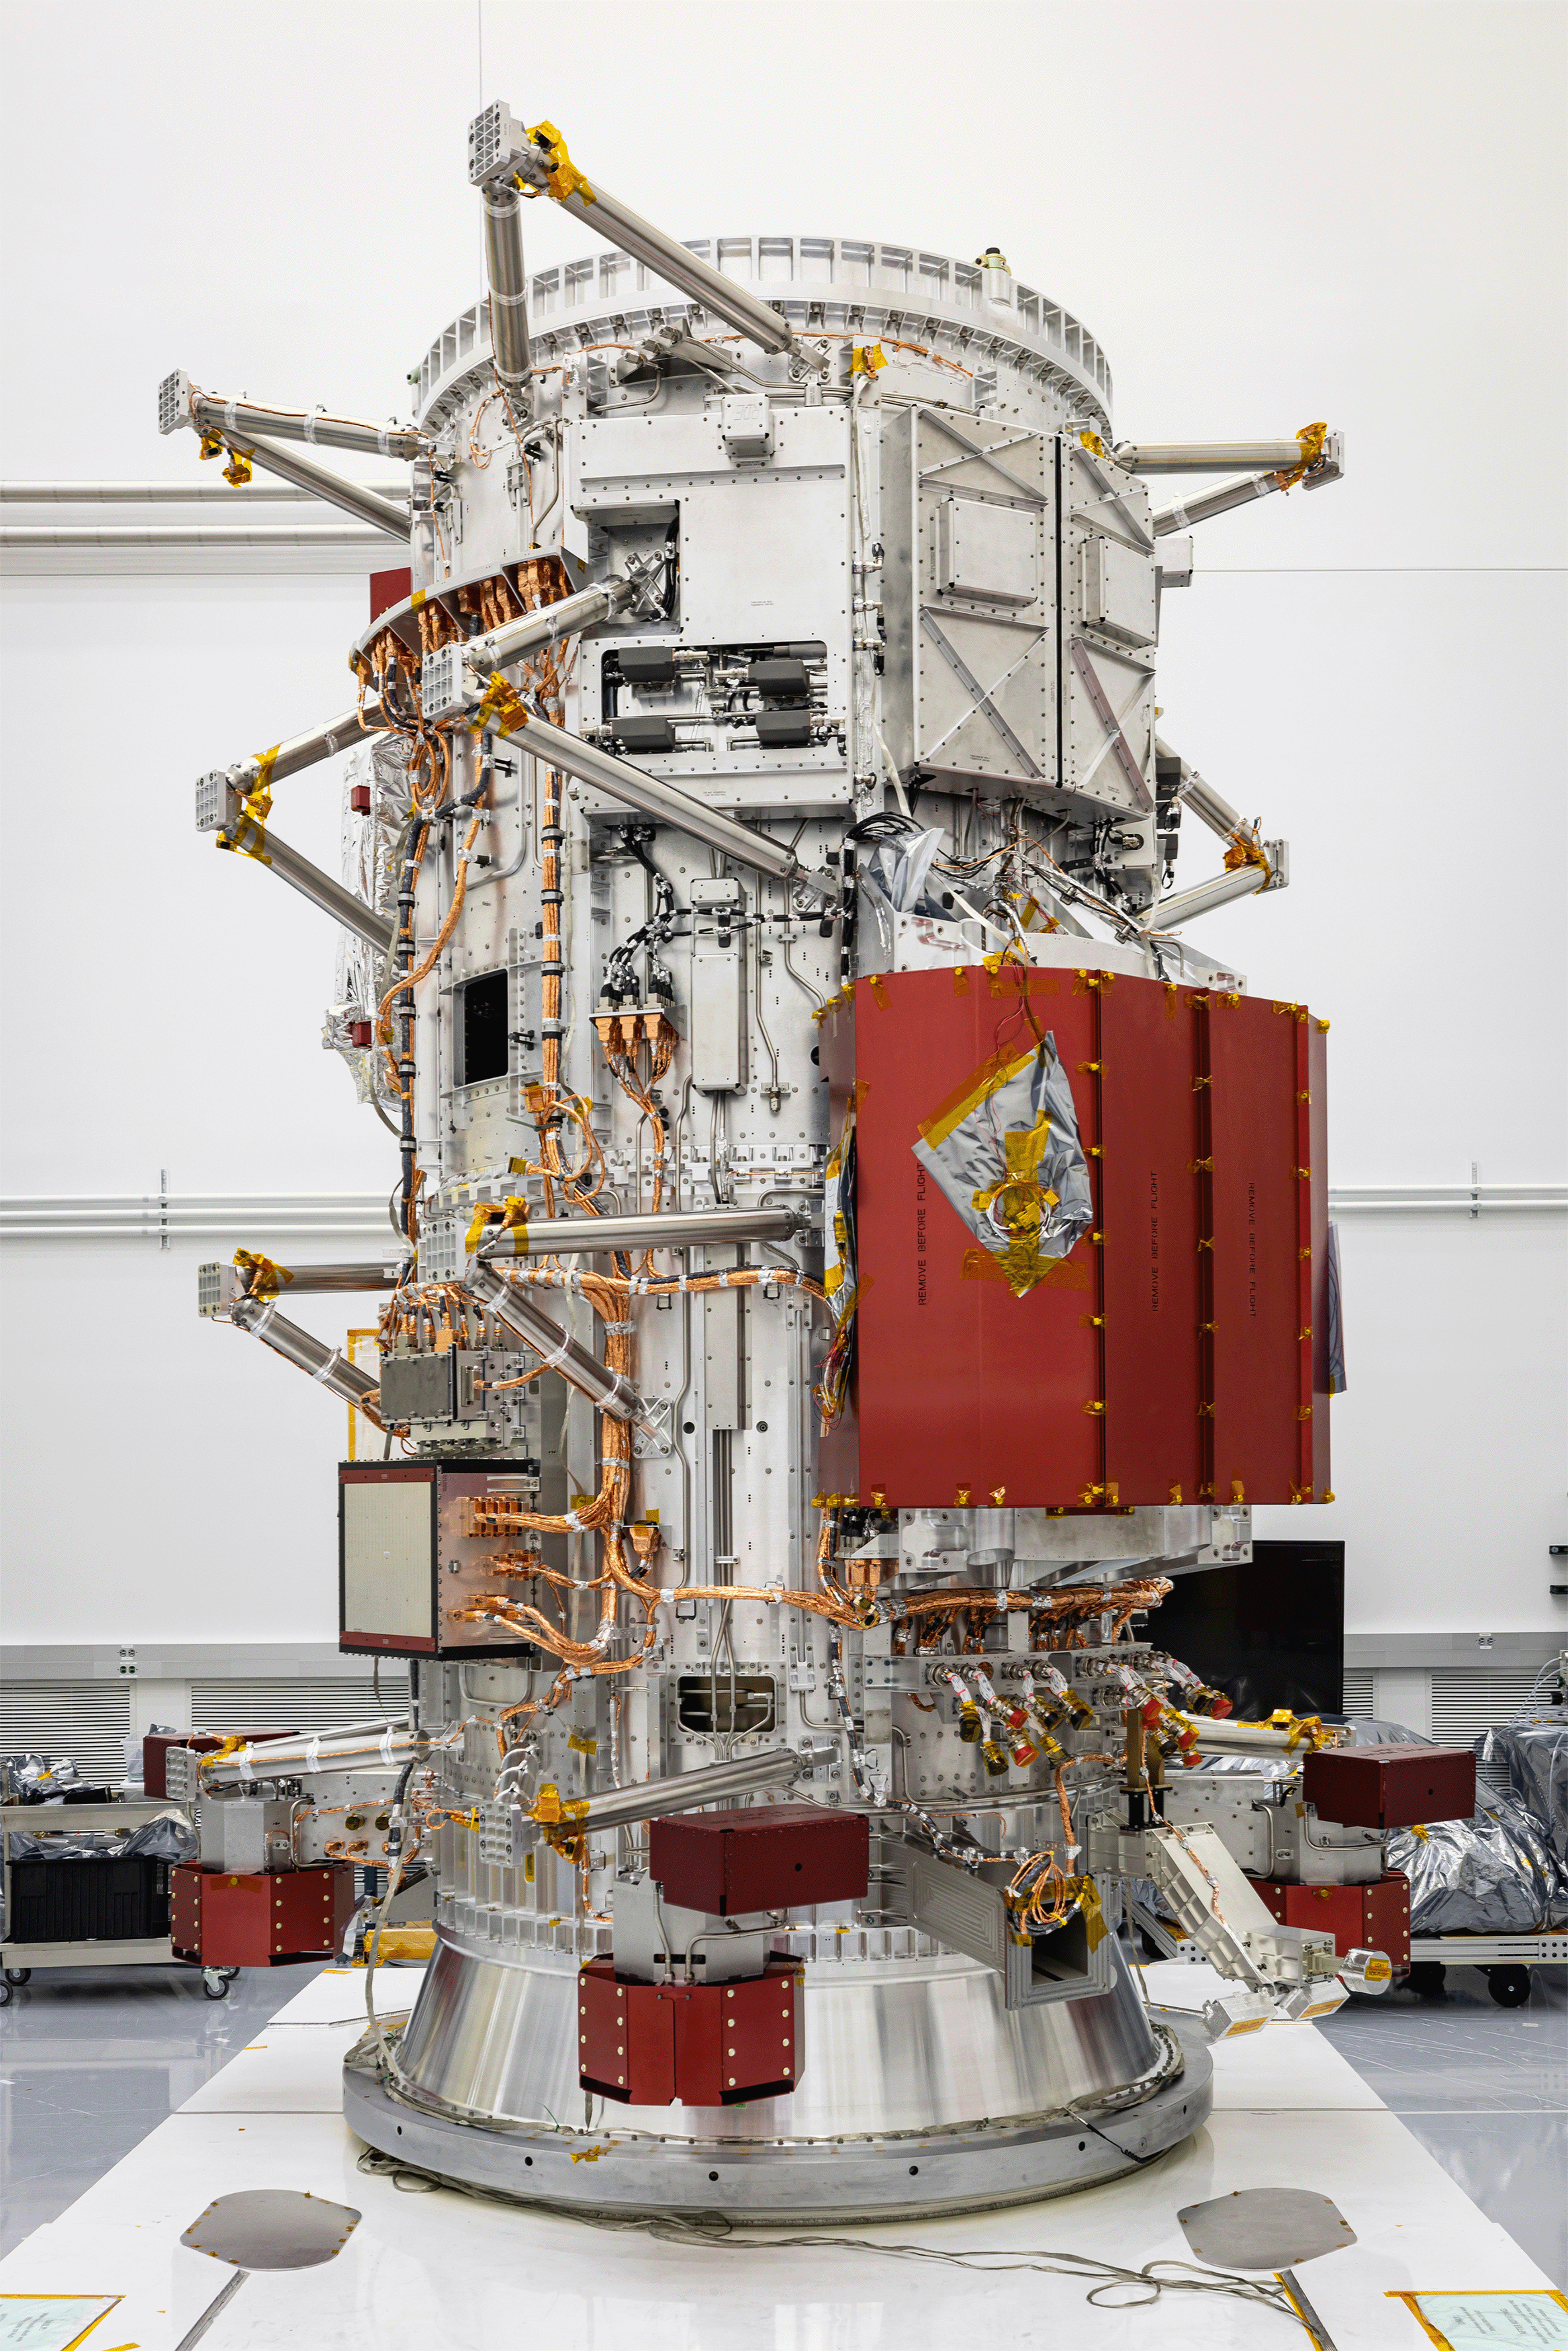 Gif of the fully assembled Europa Clipper propulsion module rotating 